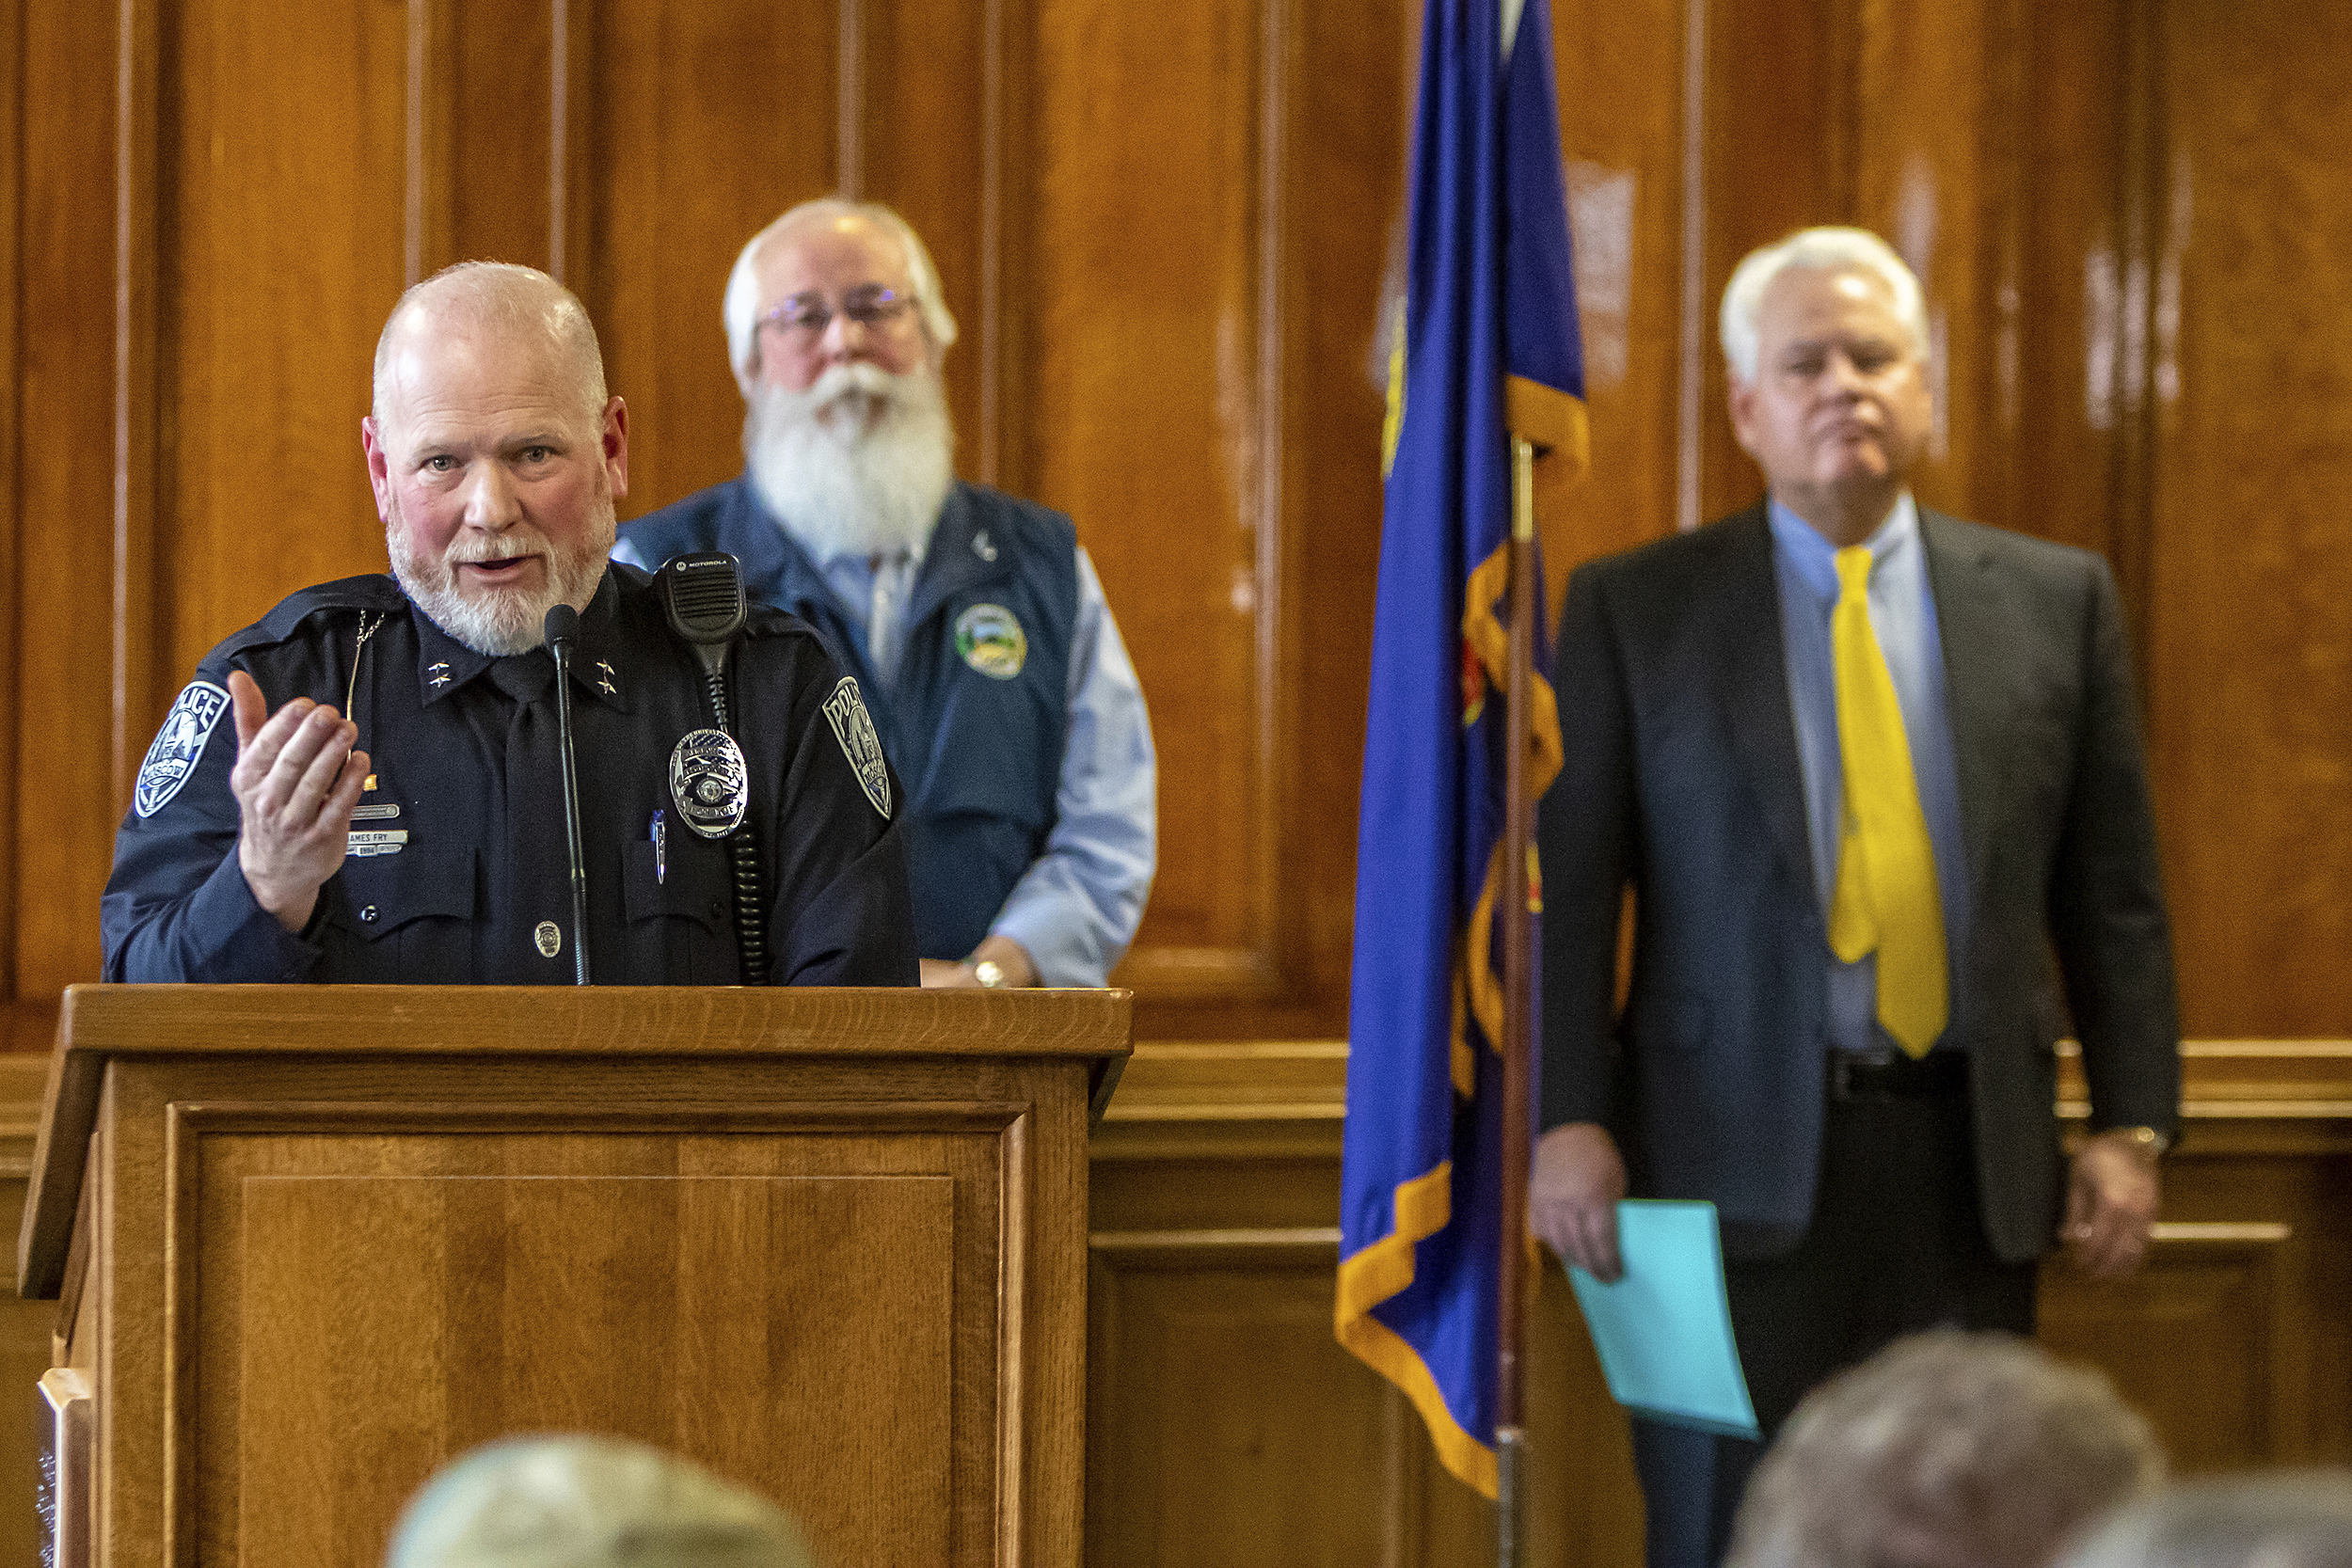 Moscow Police Department Chief James Fry answer questions during a press conference regarding the arrest of Bryan Kohberger on Friday, December 30, 2022, at City Hall in Moscow, Idaho. 